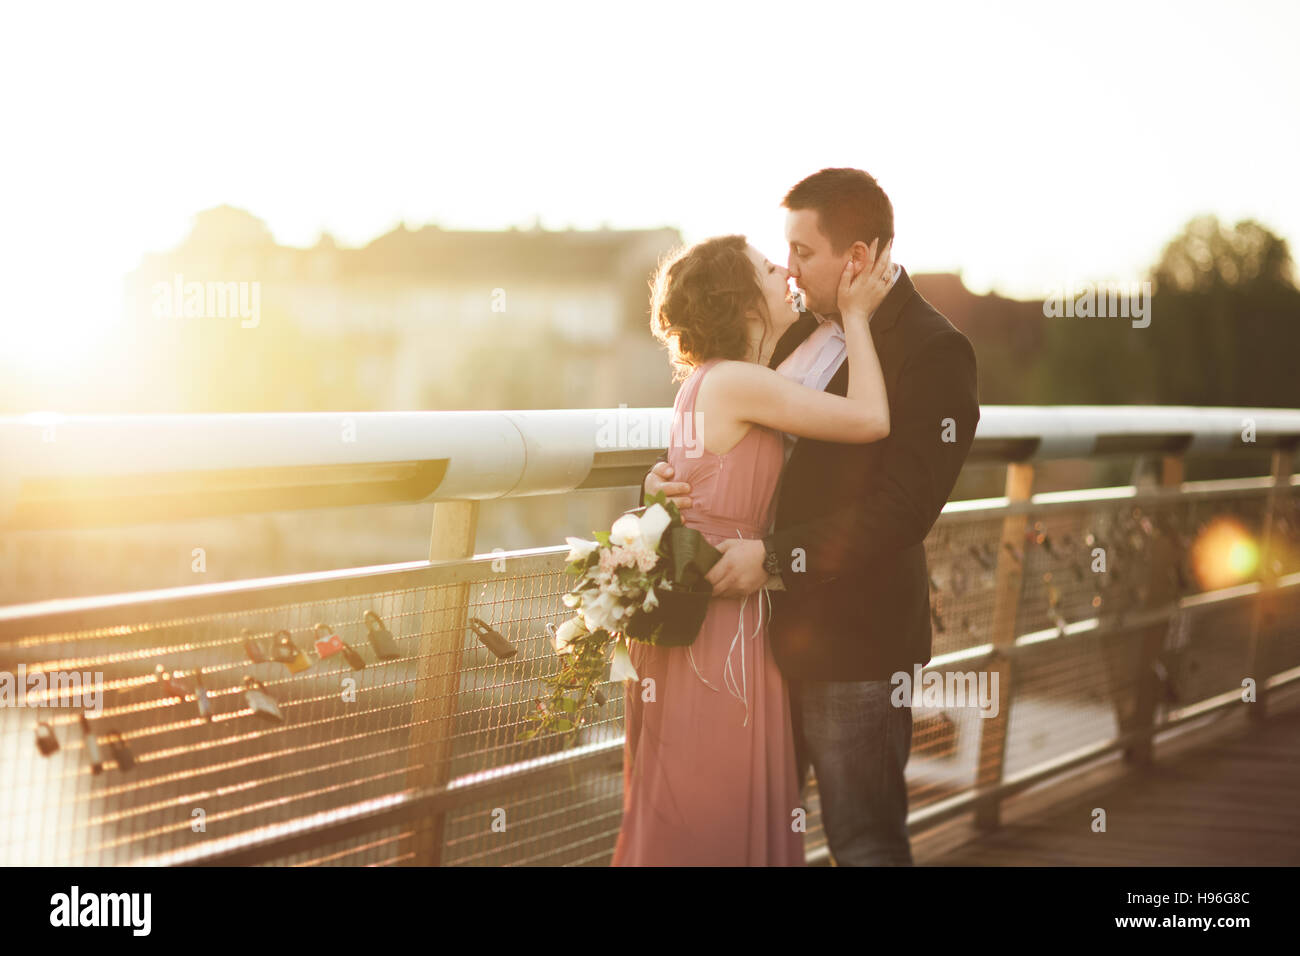 Stylish loving wedding couple, groom, bride with pink dress kissing and hugging on a bridge at sunset Stock Photo